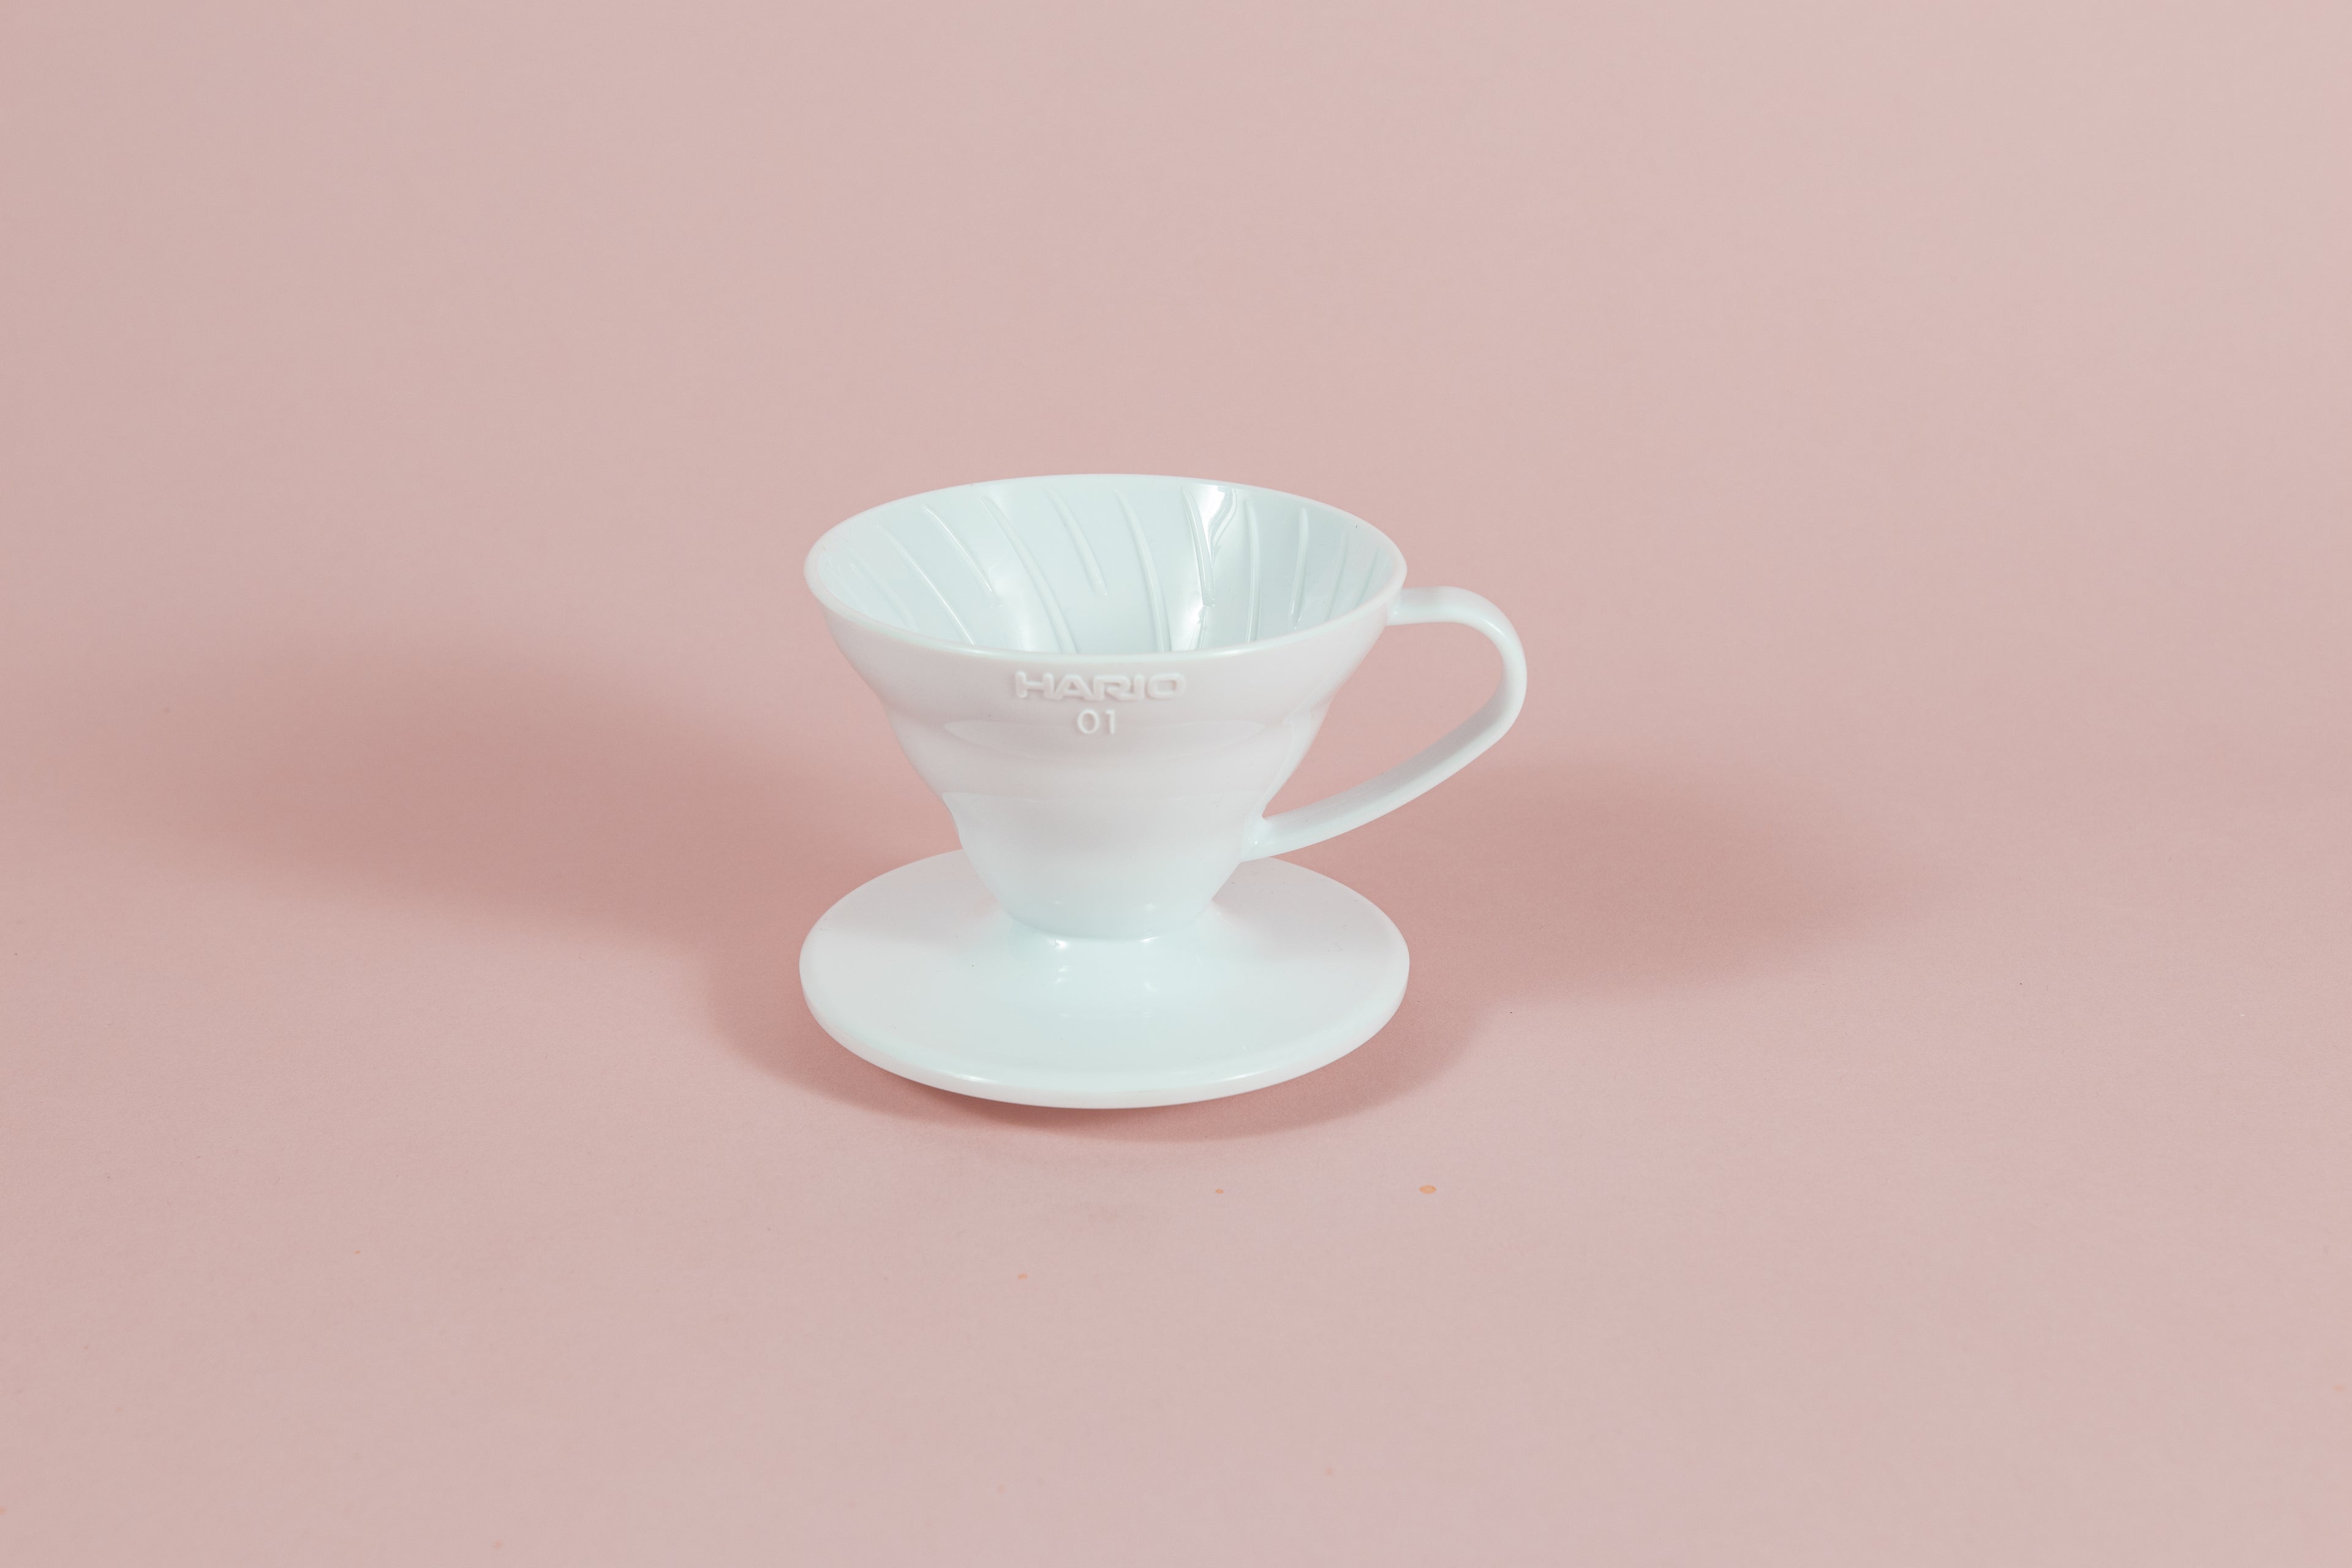 White all plastic cone shaped dripper with handle and round base on a pink backdrop.